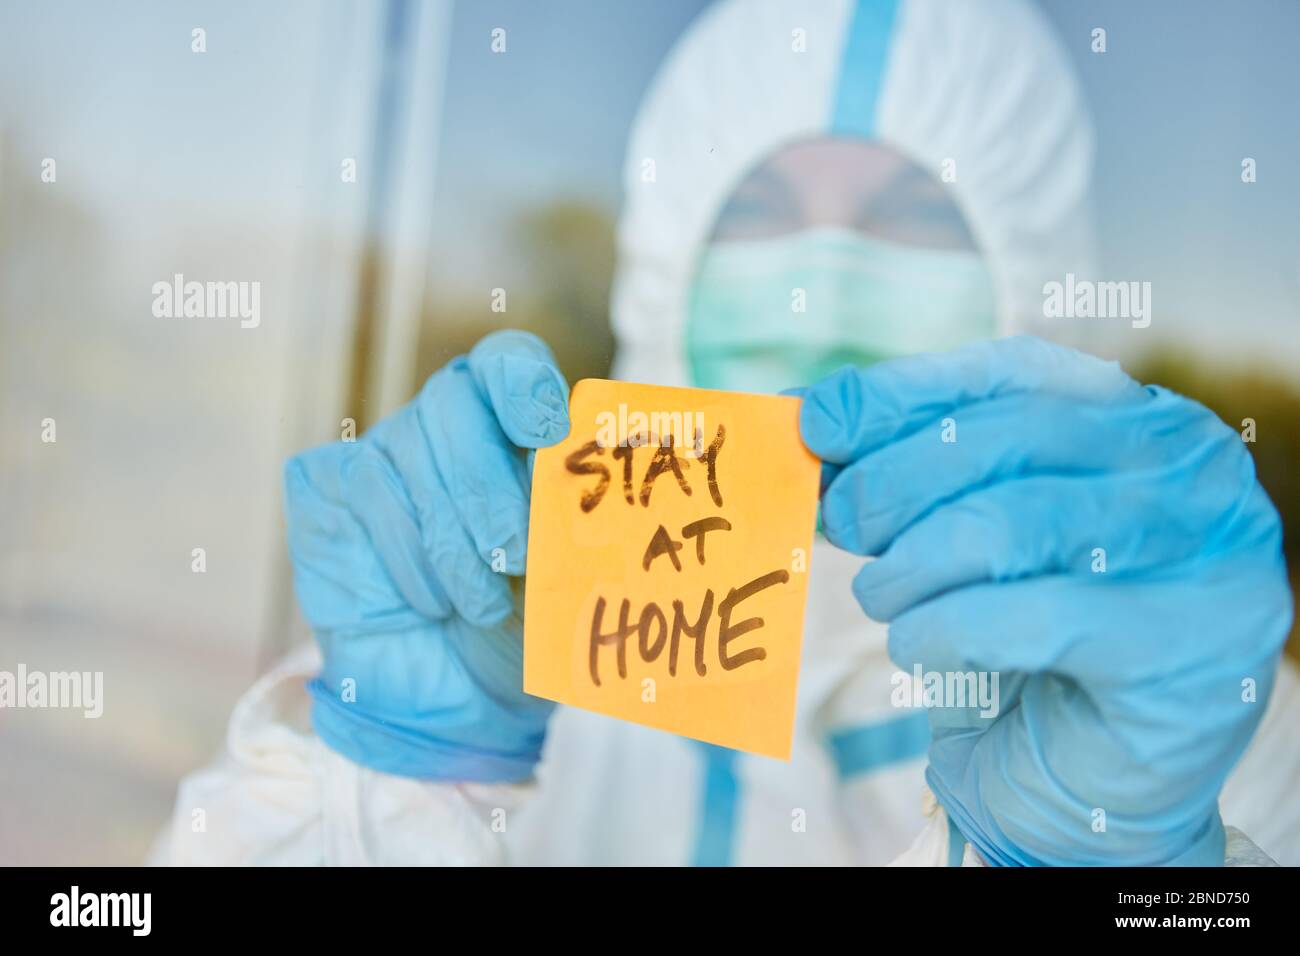 Stay at Home message on sticky note on door of clinic for coronavirus and Covid-19 pandemic Stock Photo